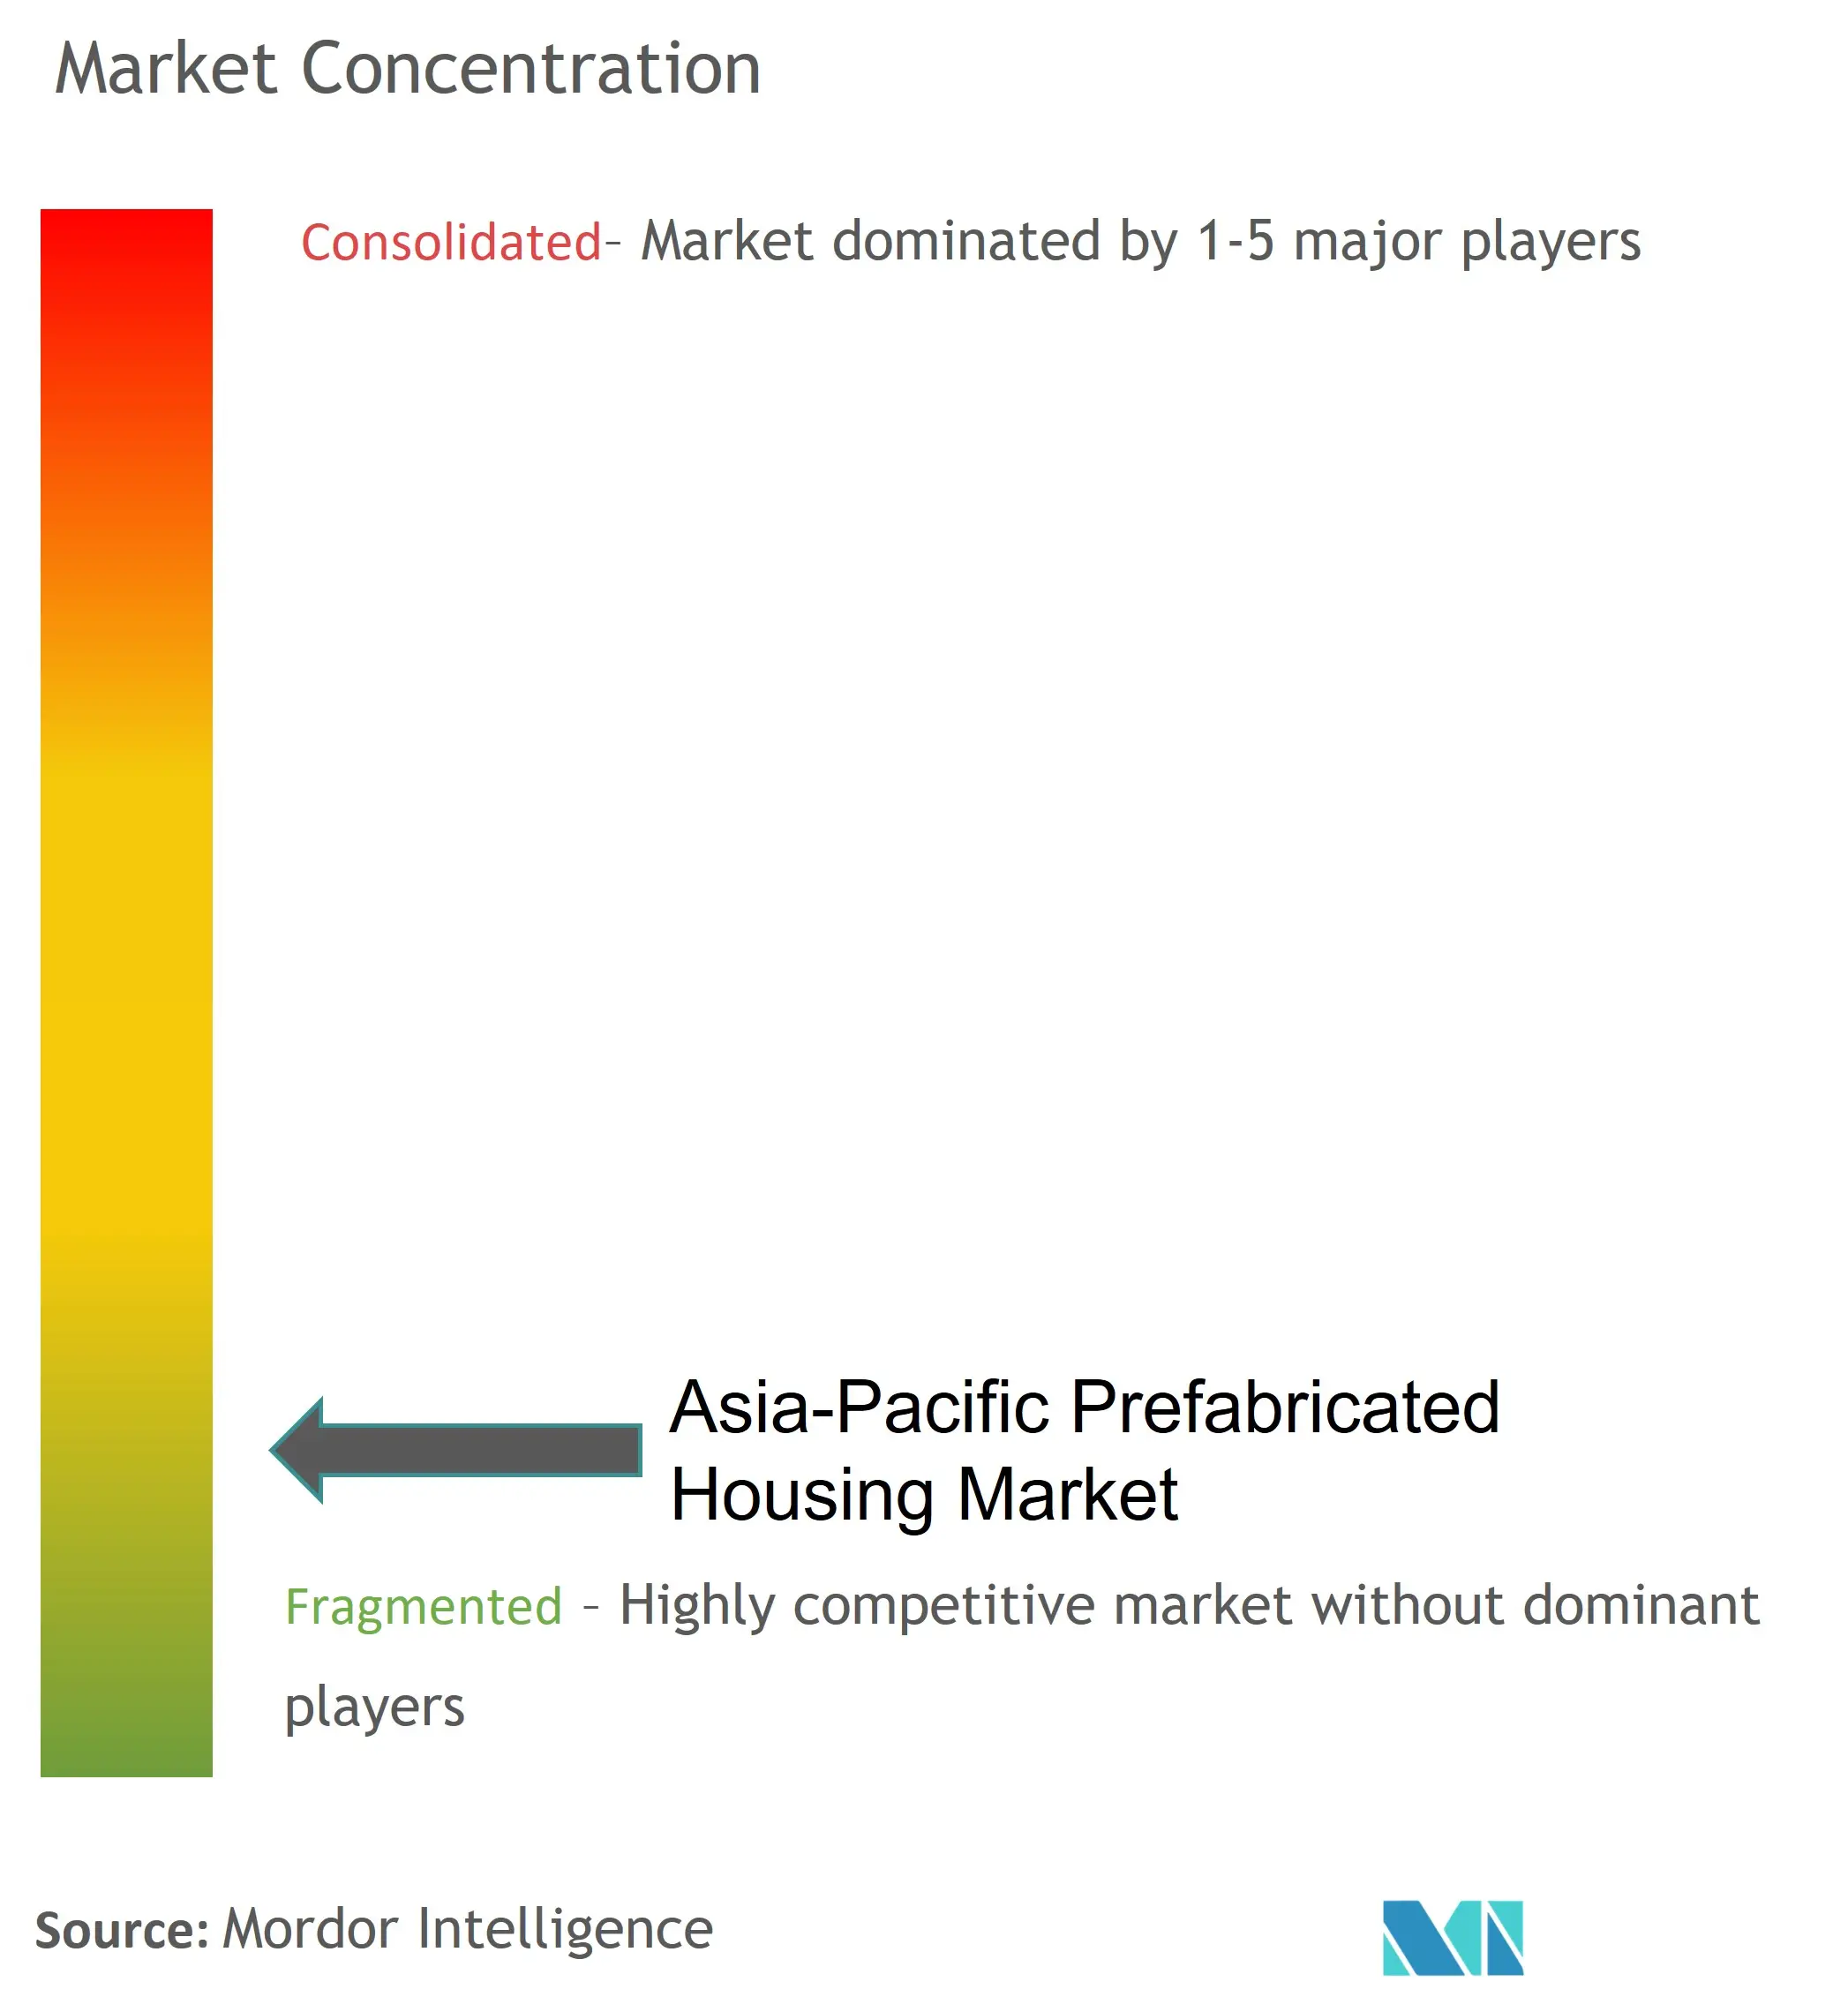 Asia-Pacific Prefabricated Housing Market Concentration